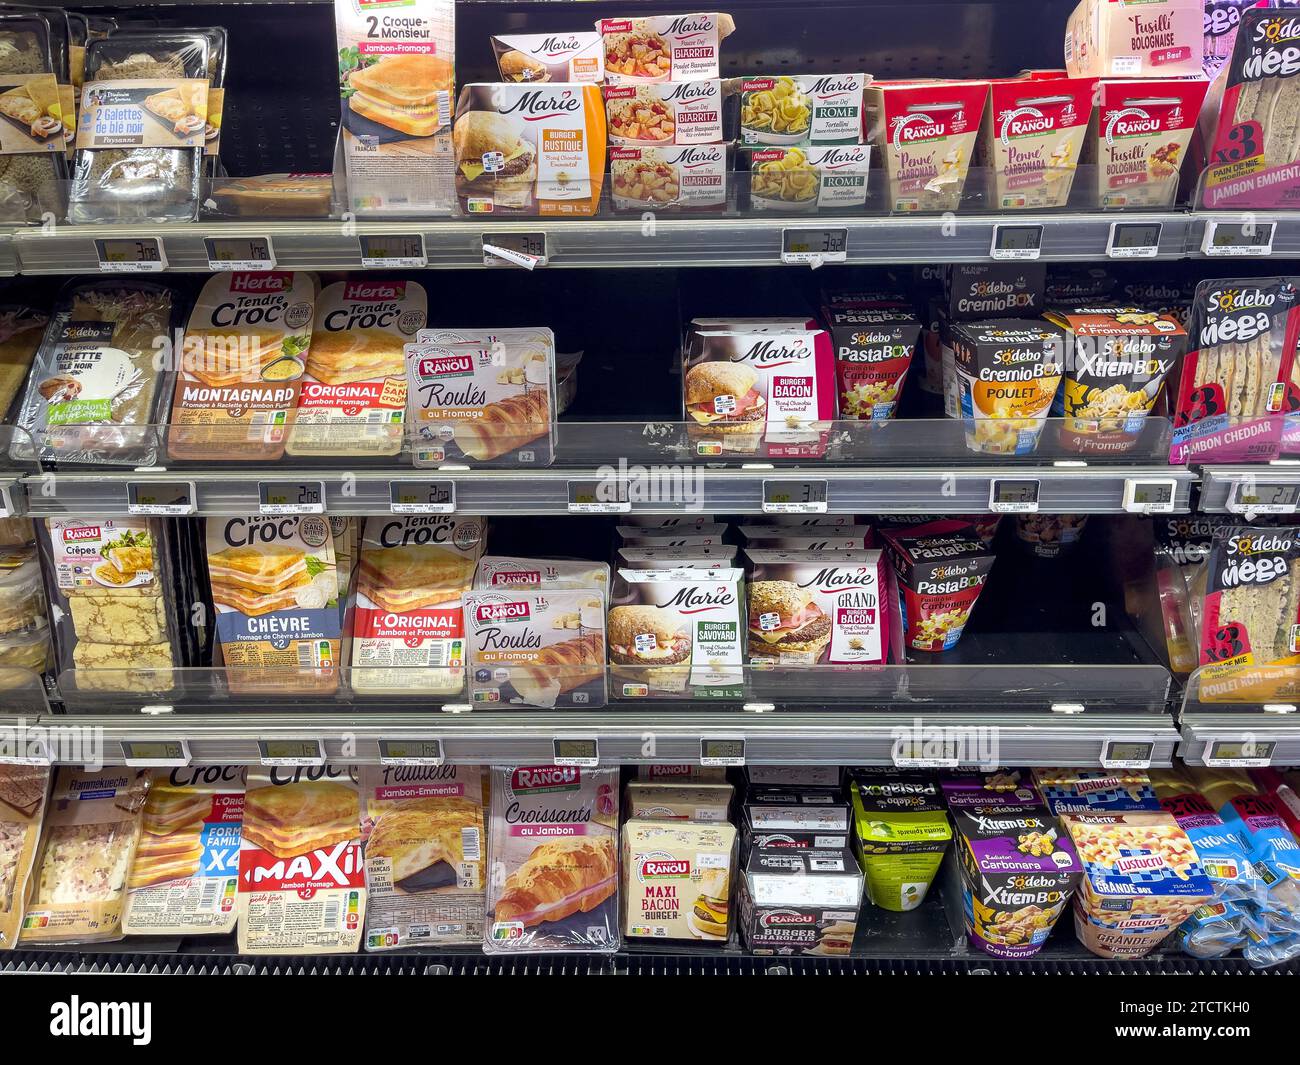 Ready-made dishes sold in plastic containers in a supermarket, Paris, France Stock Photo